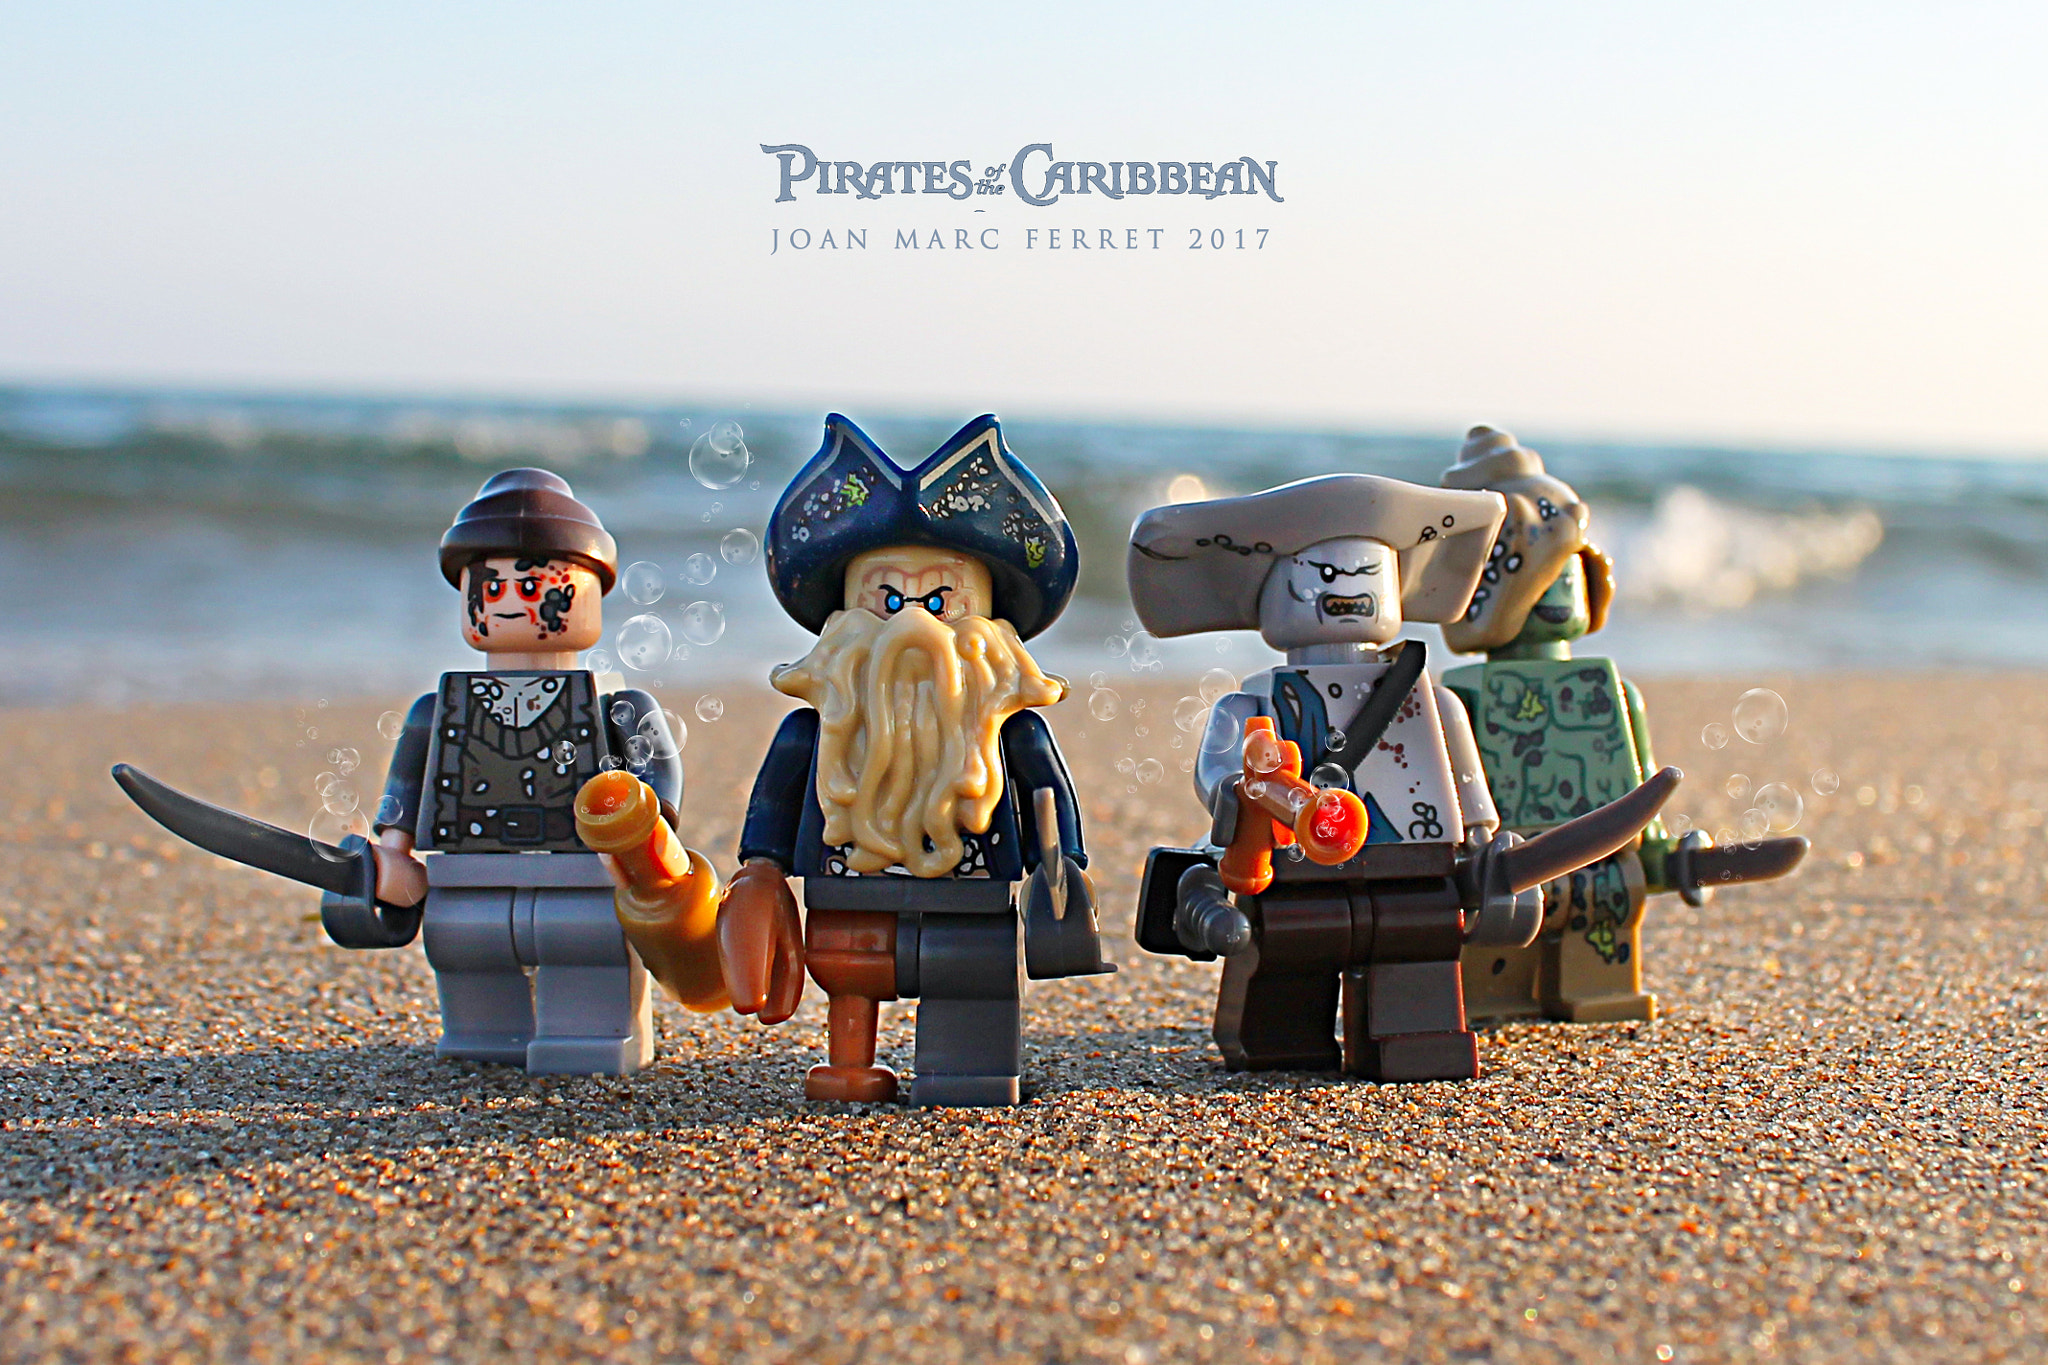 General 2048x1365 500px LEGO toys sand Pirates of the Caribbean 2017 (Year) Davy Jones figurines Joan Marc Ferret movie characters closeup miniatures watermarked